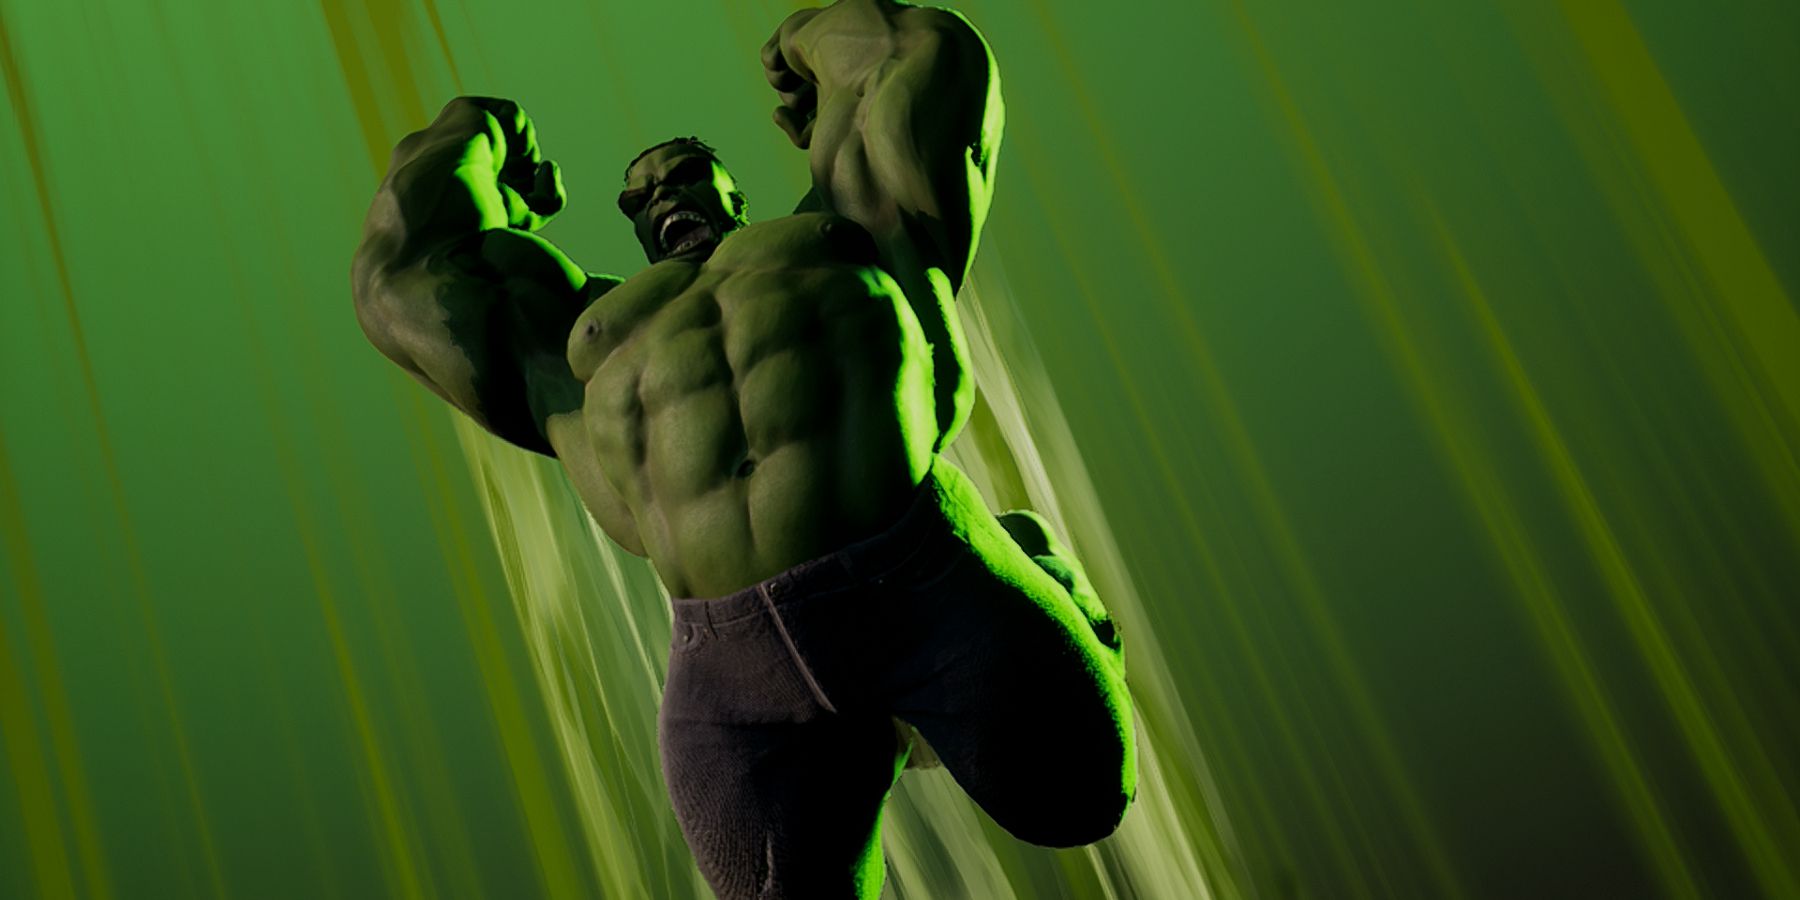 Tactical RPG Marvel's Midnight Suns Launches Friday, Reveals Hulk